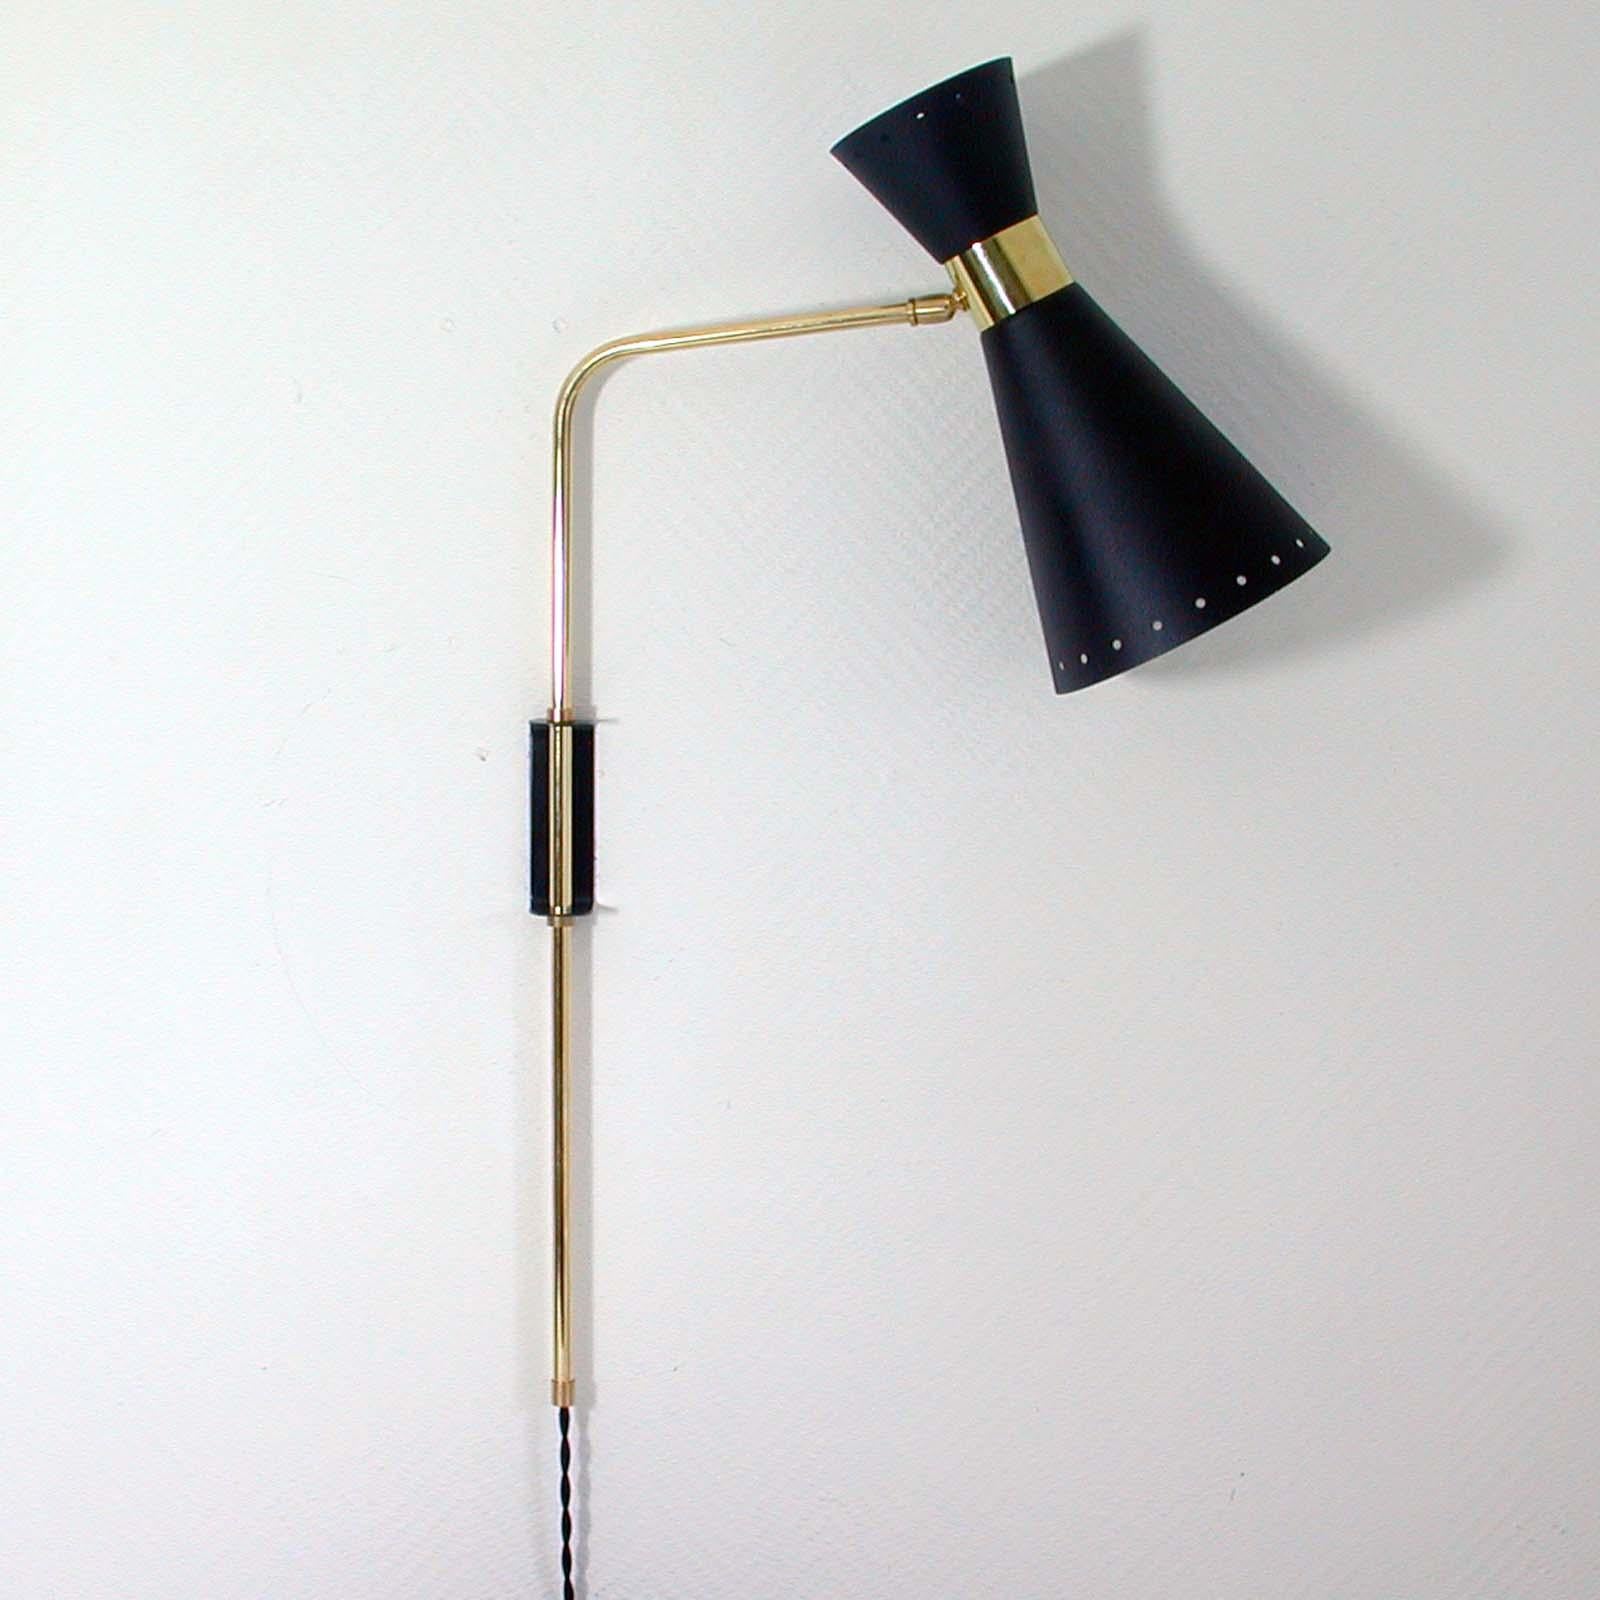 This awesome Pierre Guariche style articulating wall lamp with adjustable shade and height adjustable lamp arm was made in France in the 1950s. The light features a lampshade made of black lacquered metal with brass details. The swiveling and